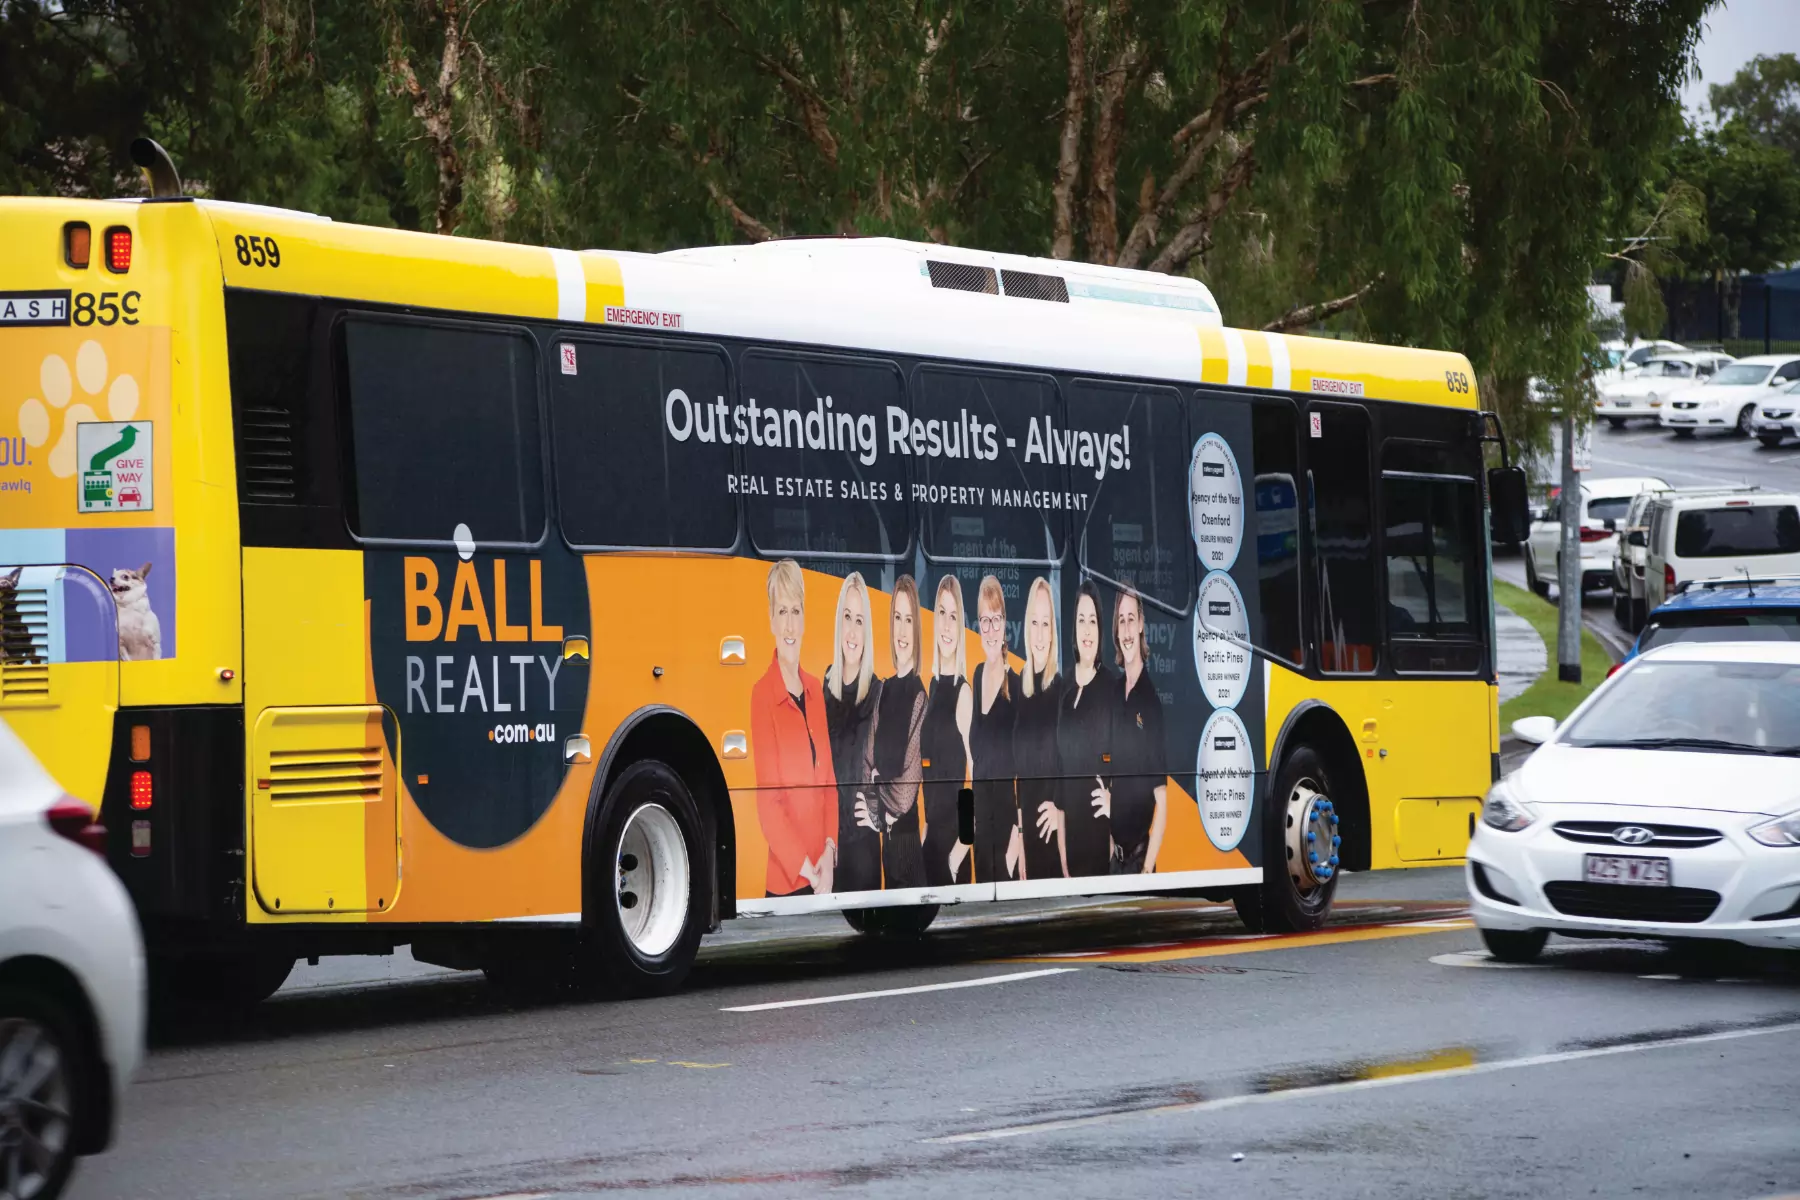 Bus Ad Design on the Gold Coast. Get your ads on Surfside buses with highly professional designs.